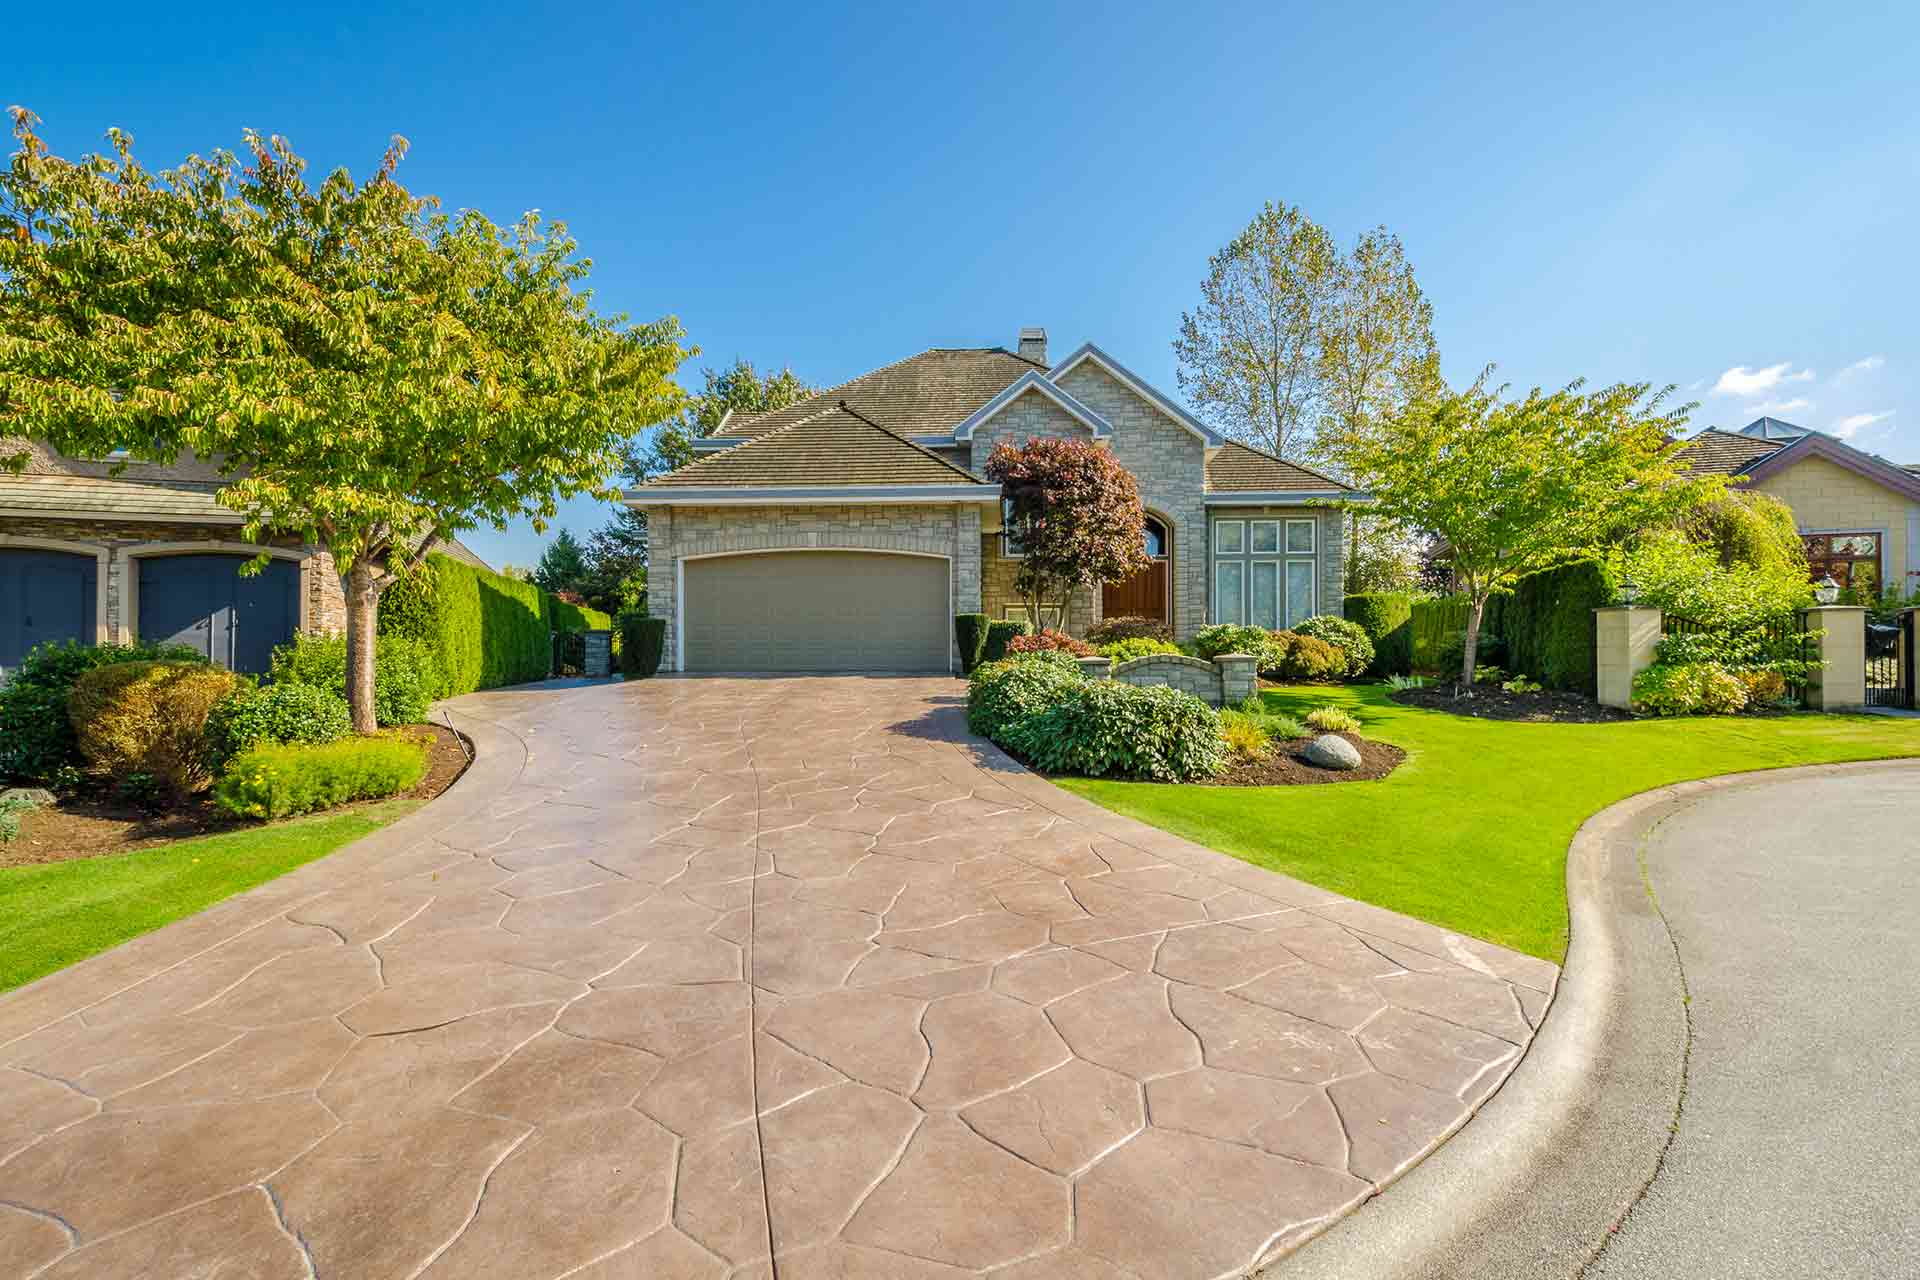 How Much Does A Driveway Increase Home Value